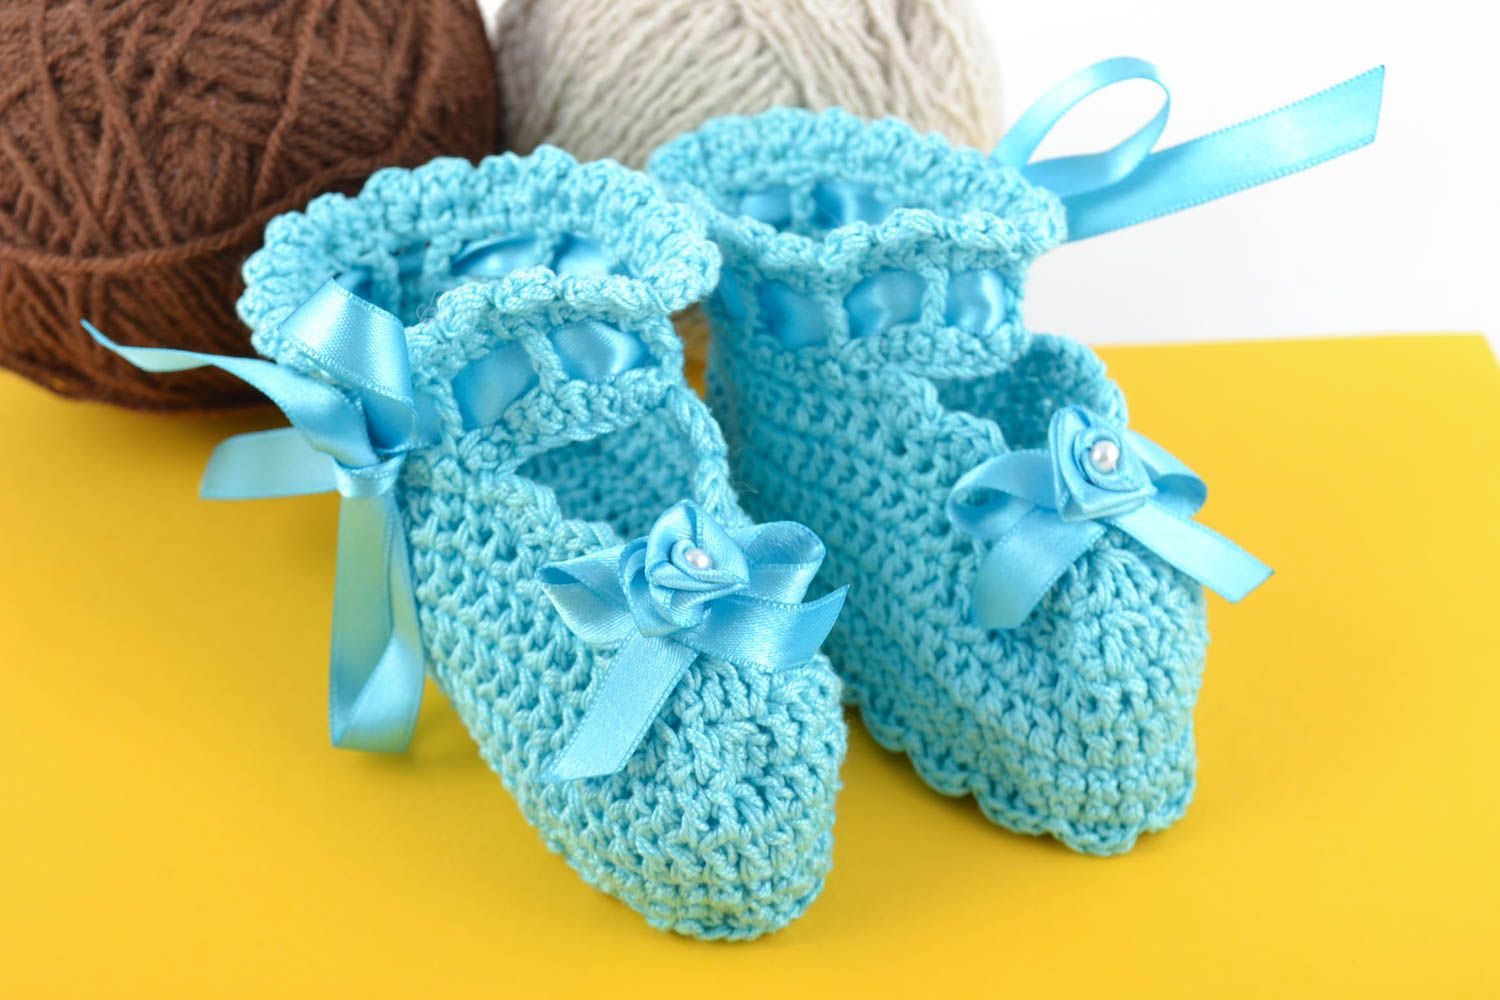 Beautiful handmade blue crochet cotton baby booties with bows and flowers photo 1